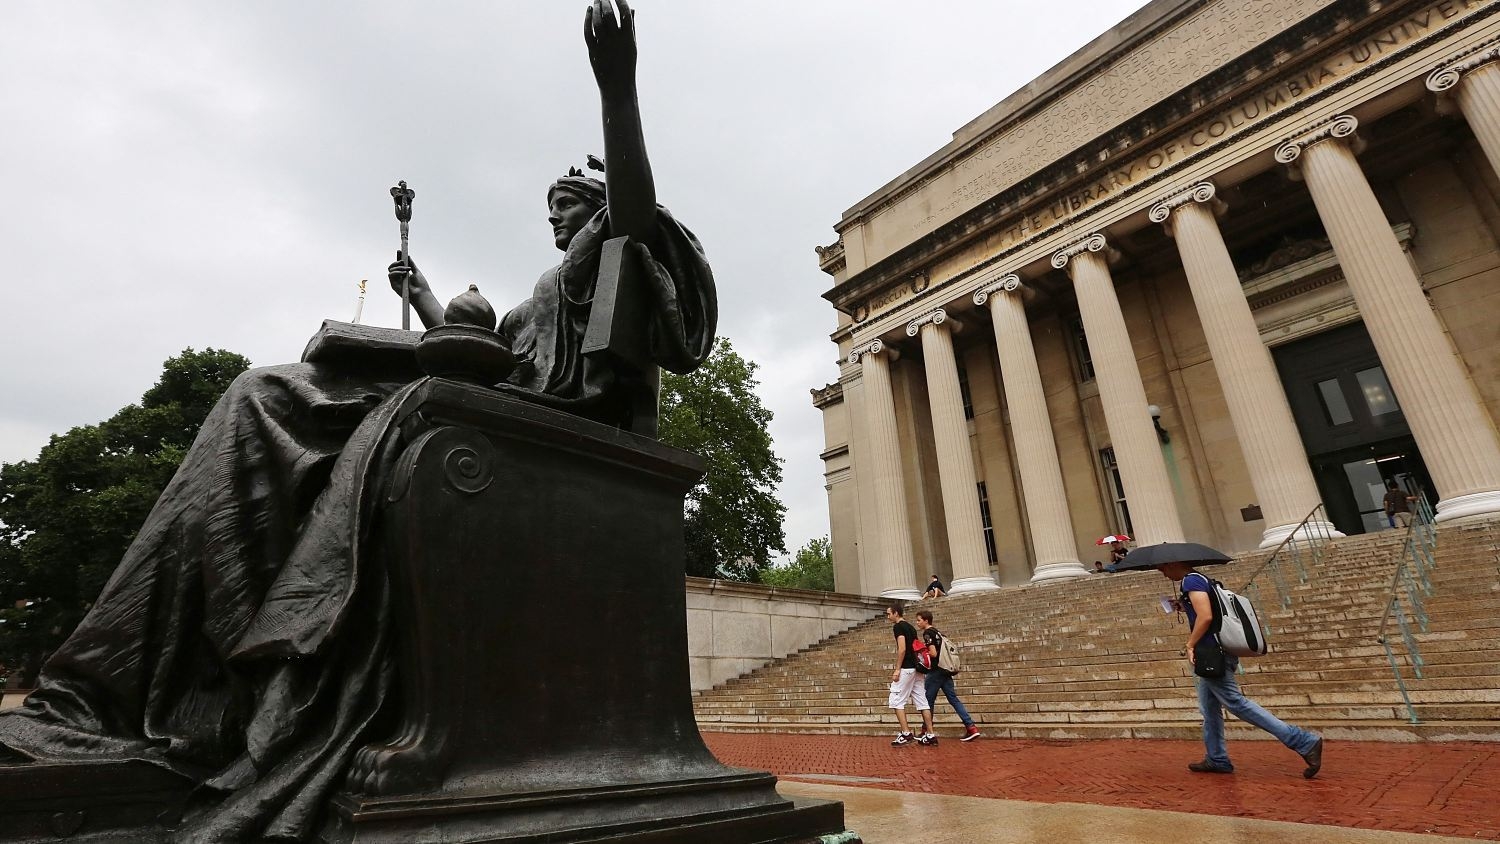 People walk past the Alma Mater statue on the Columbia University campus on 1 July 2013 in New York City.